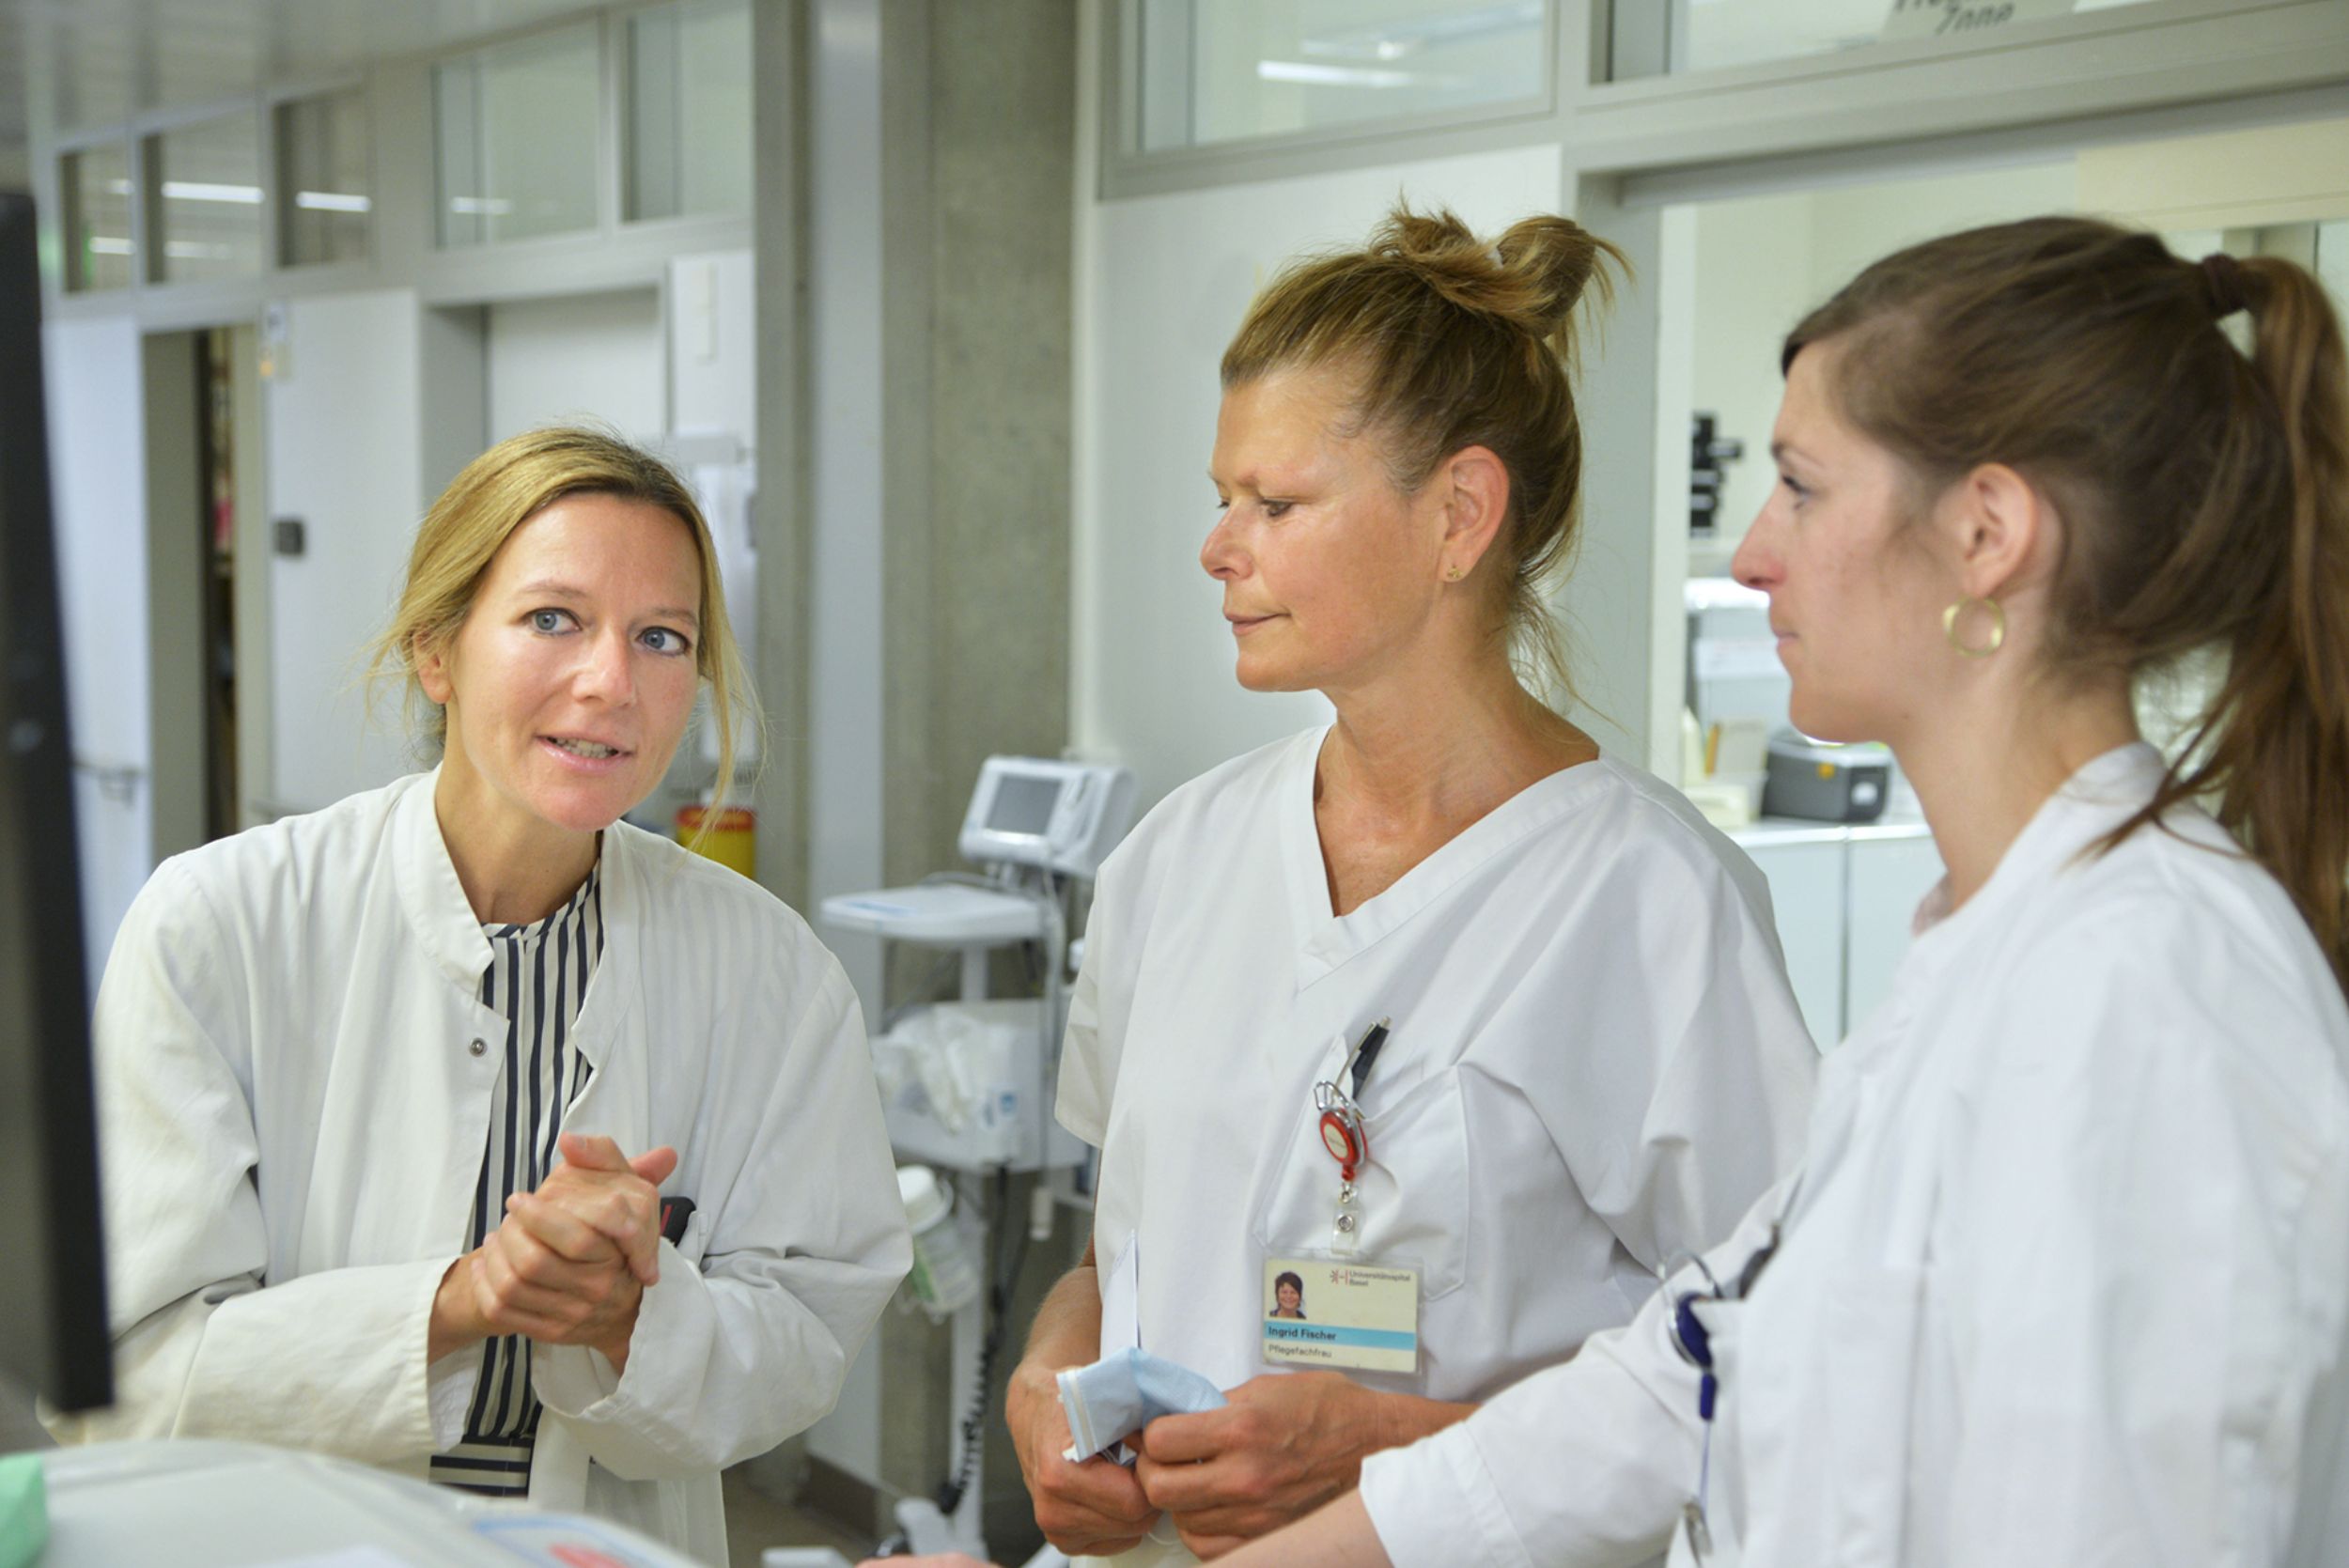 Prof. Sabina Hunziker providing support during a patient visit